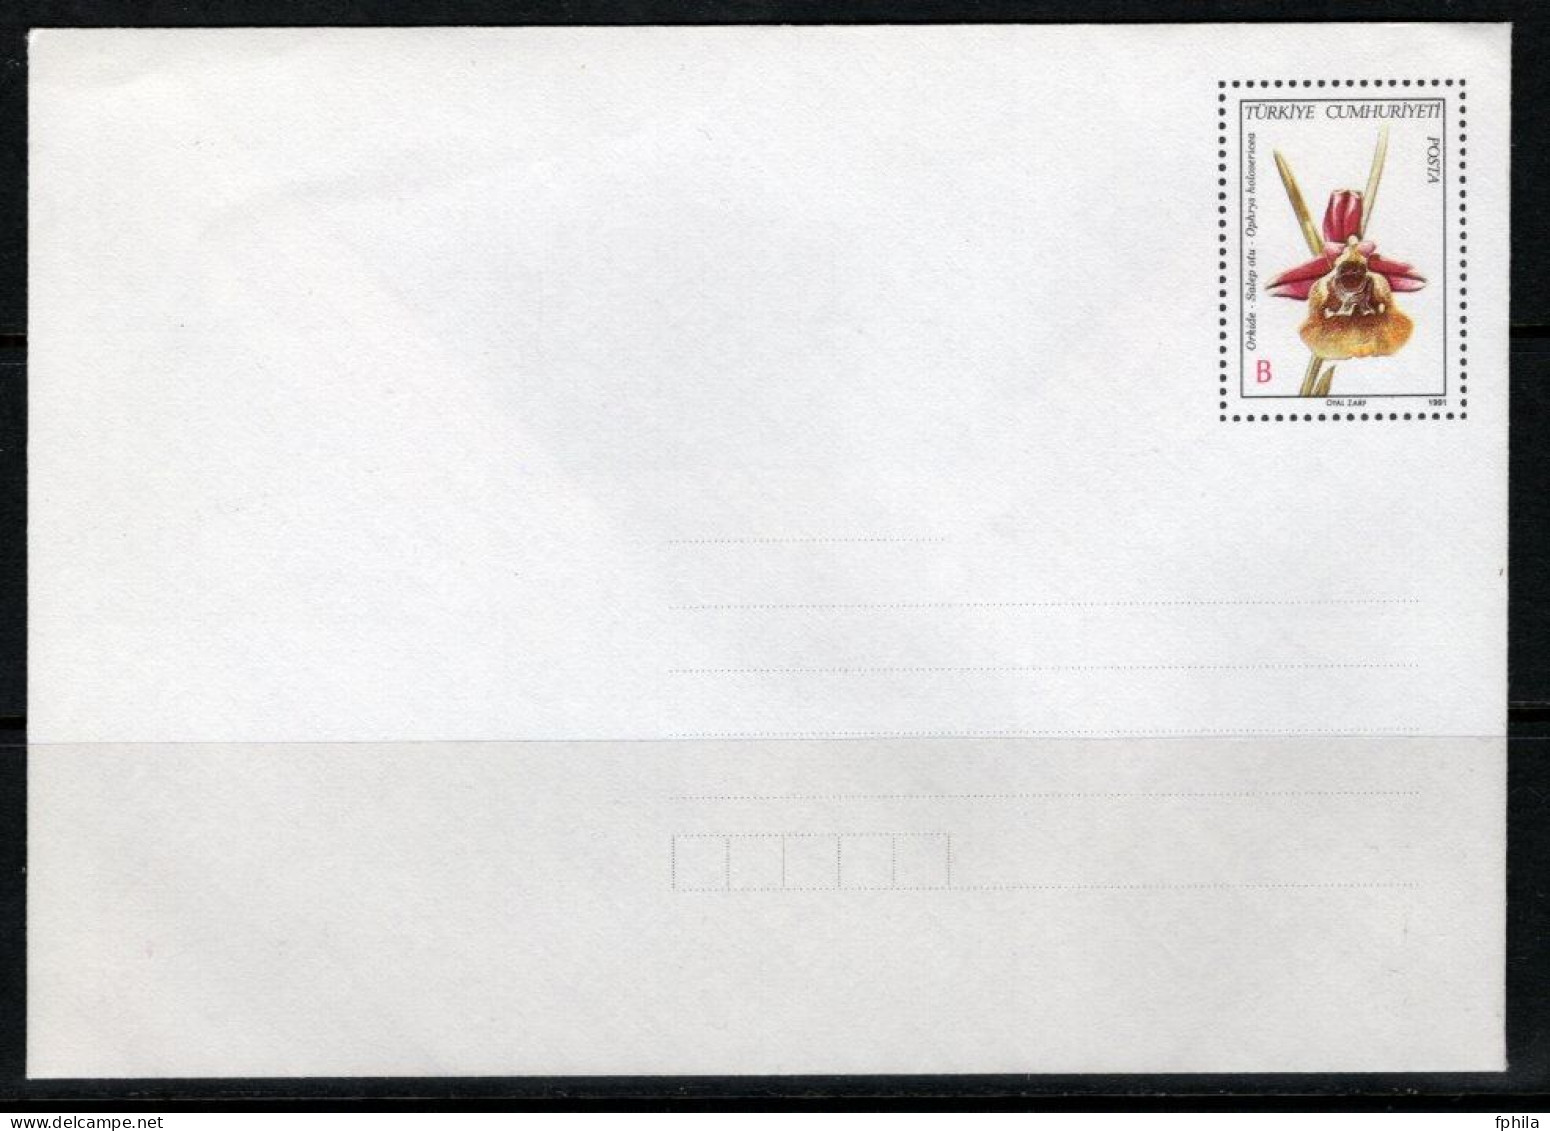 1991 TURKEY LETTER ENVELOPE WITH ORCHID ILLUSTRATION - Entiers Postaux